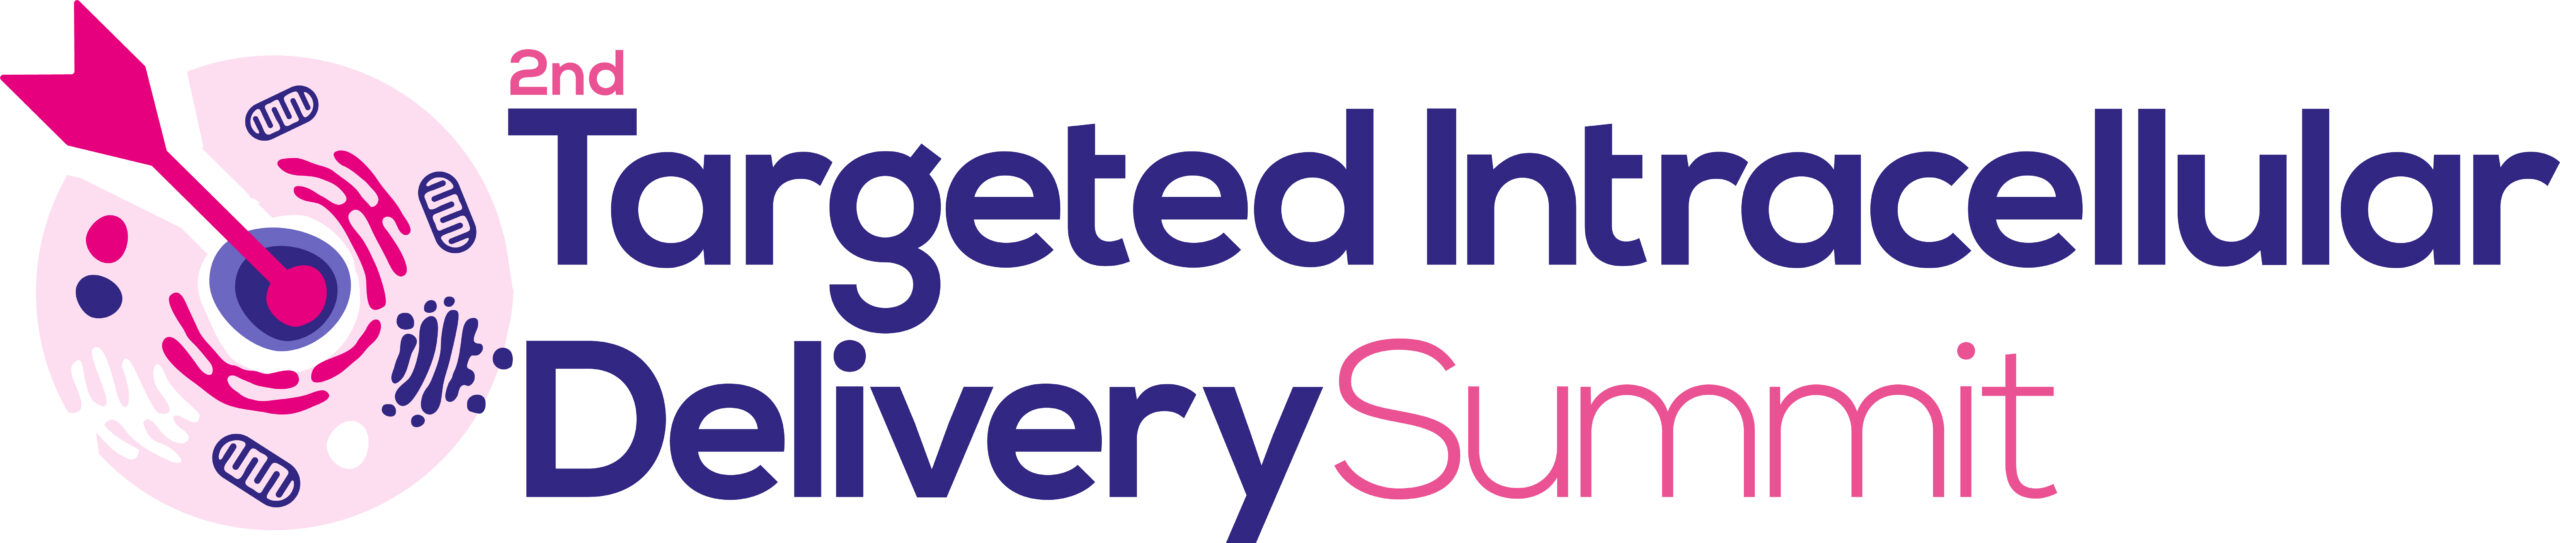 2nd Targeted Intracellular Delivery Summit logo FINAL